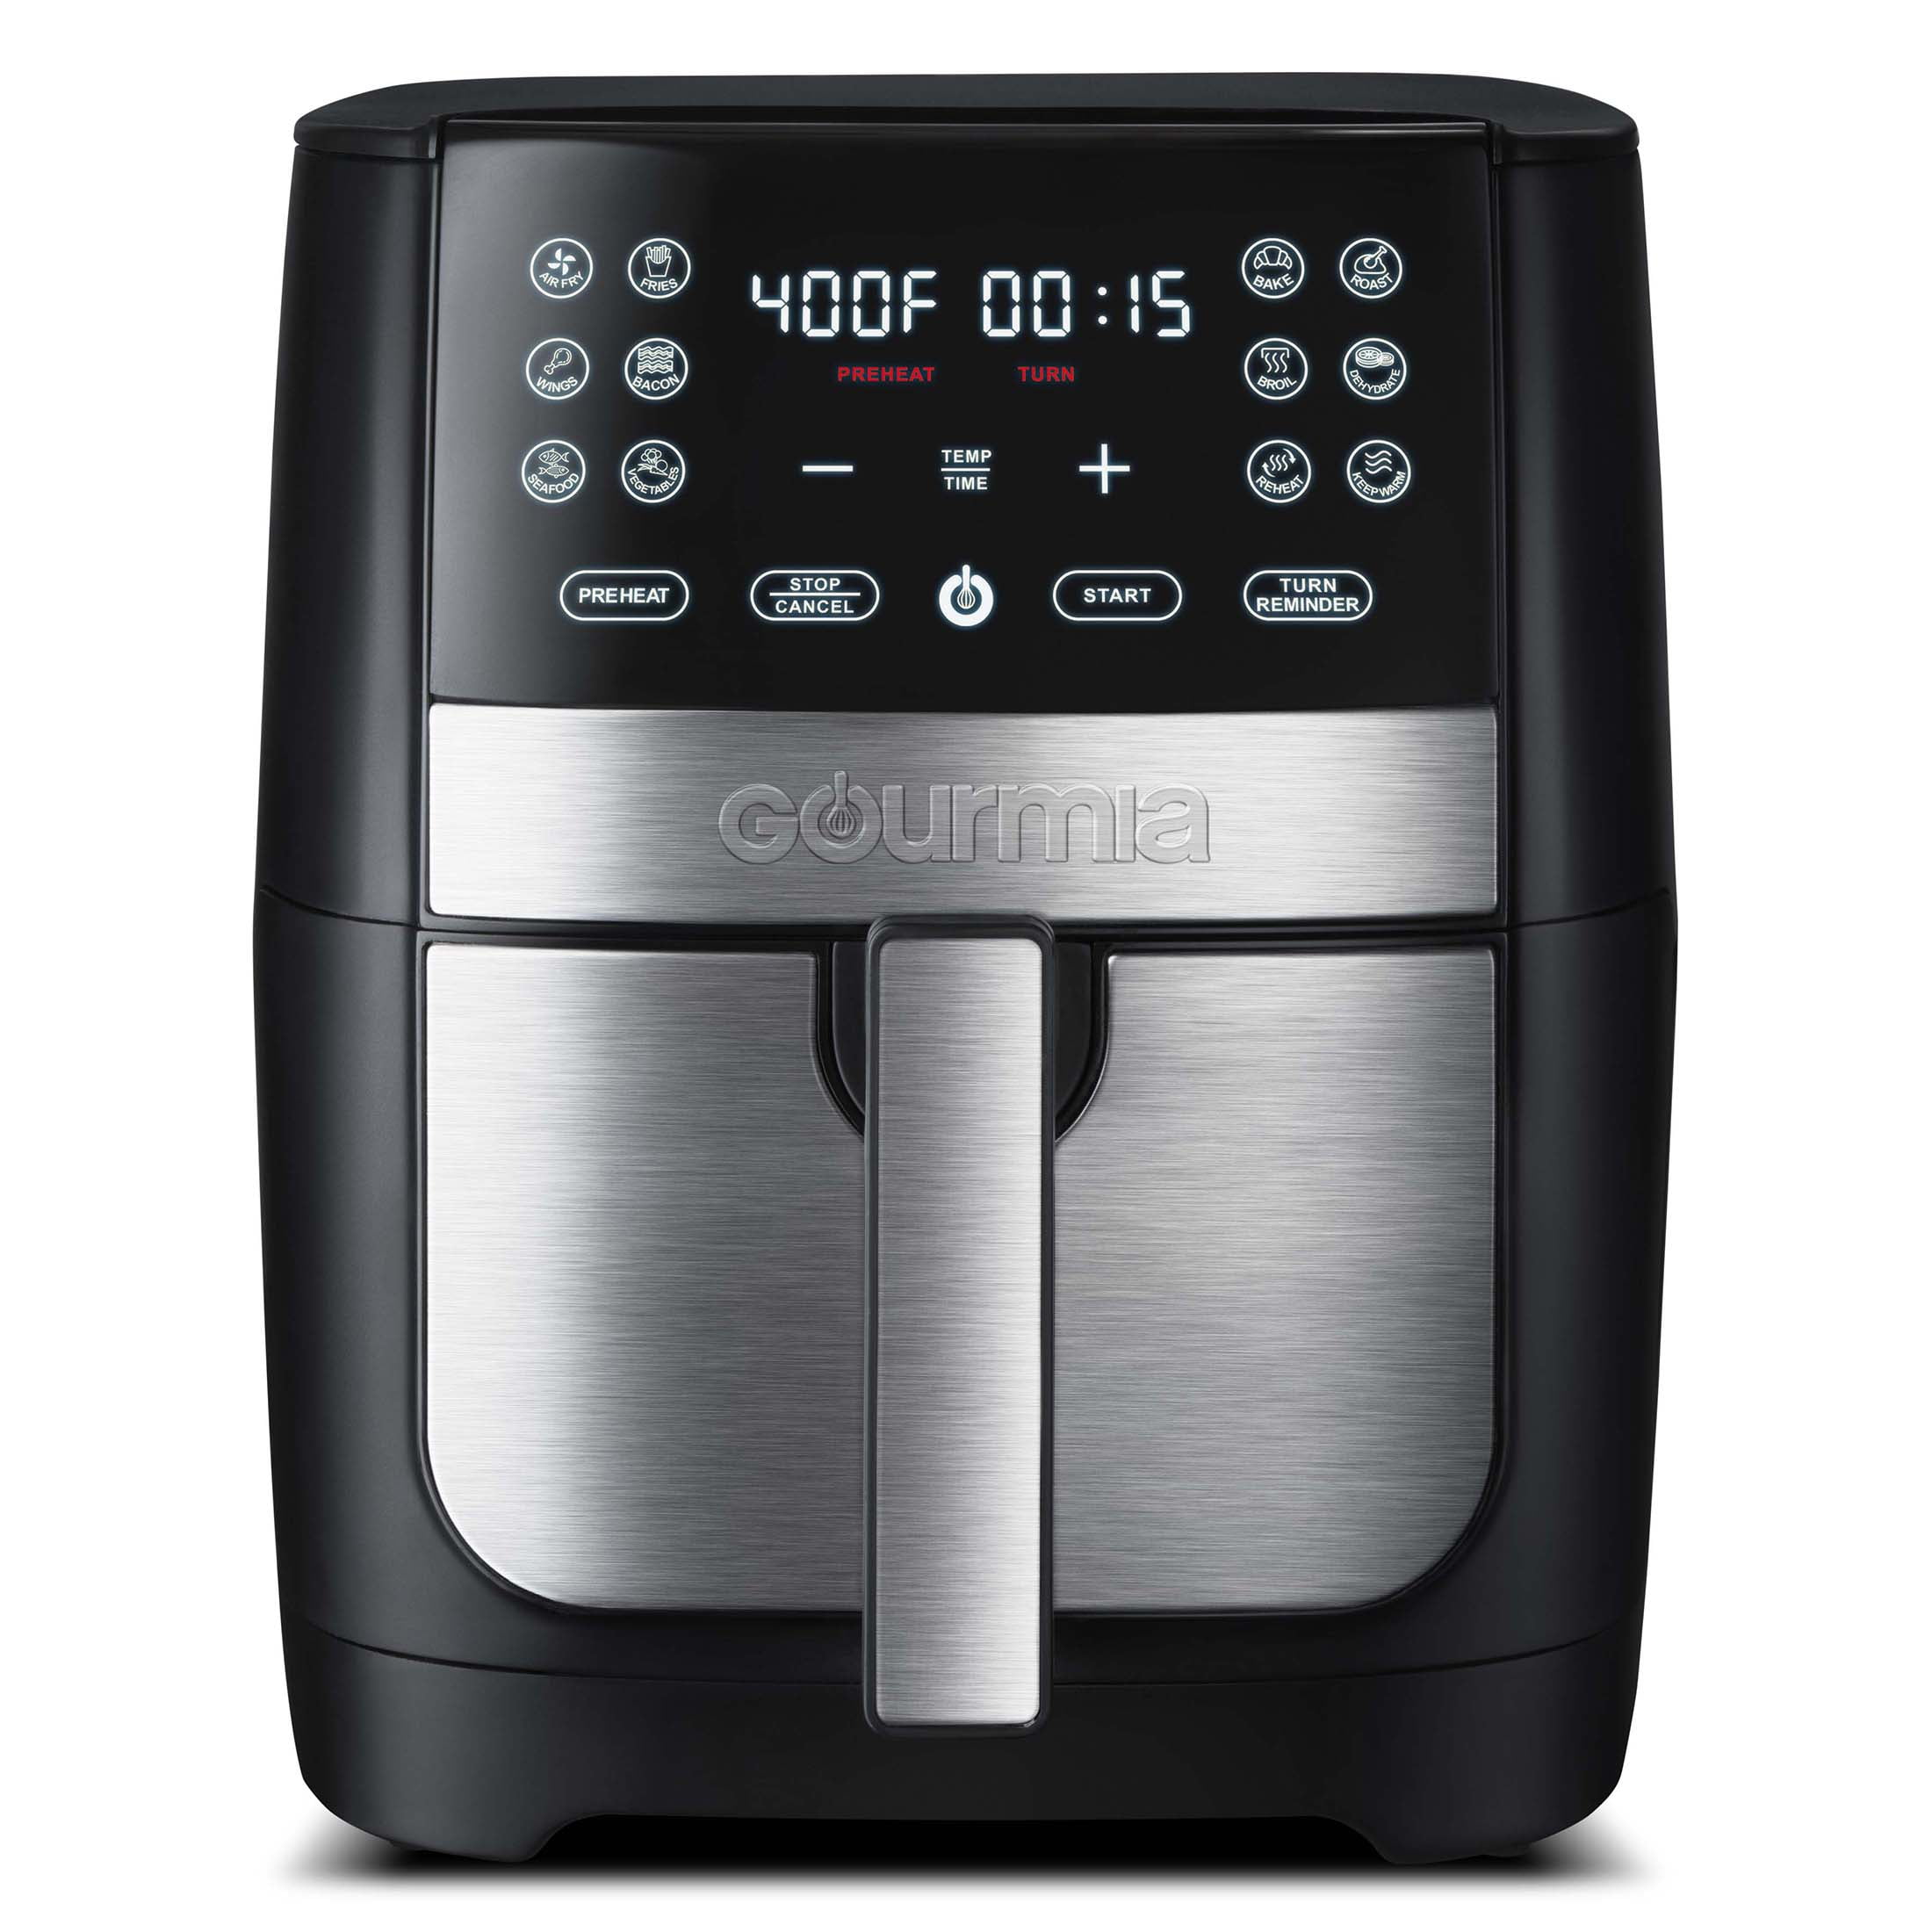  Gourmia Air Fryer Oven Digital Display 8 Quart Large AirFryer  Cooker 12 Touch Cooking Presets, XL Air Fryer Basket 1700w Power  Multifunction GAF856 Black and Stainless stainless steel air fryer 